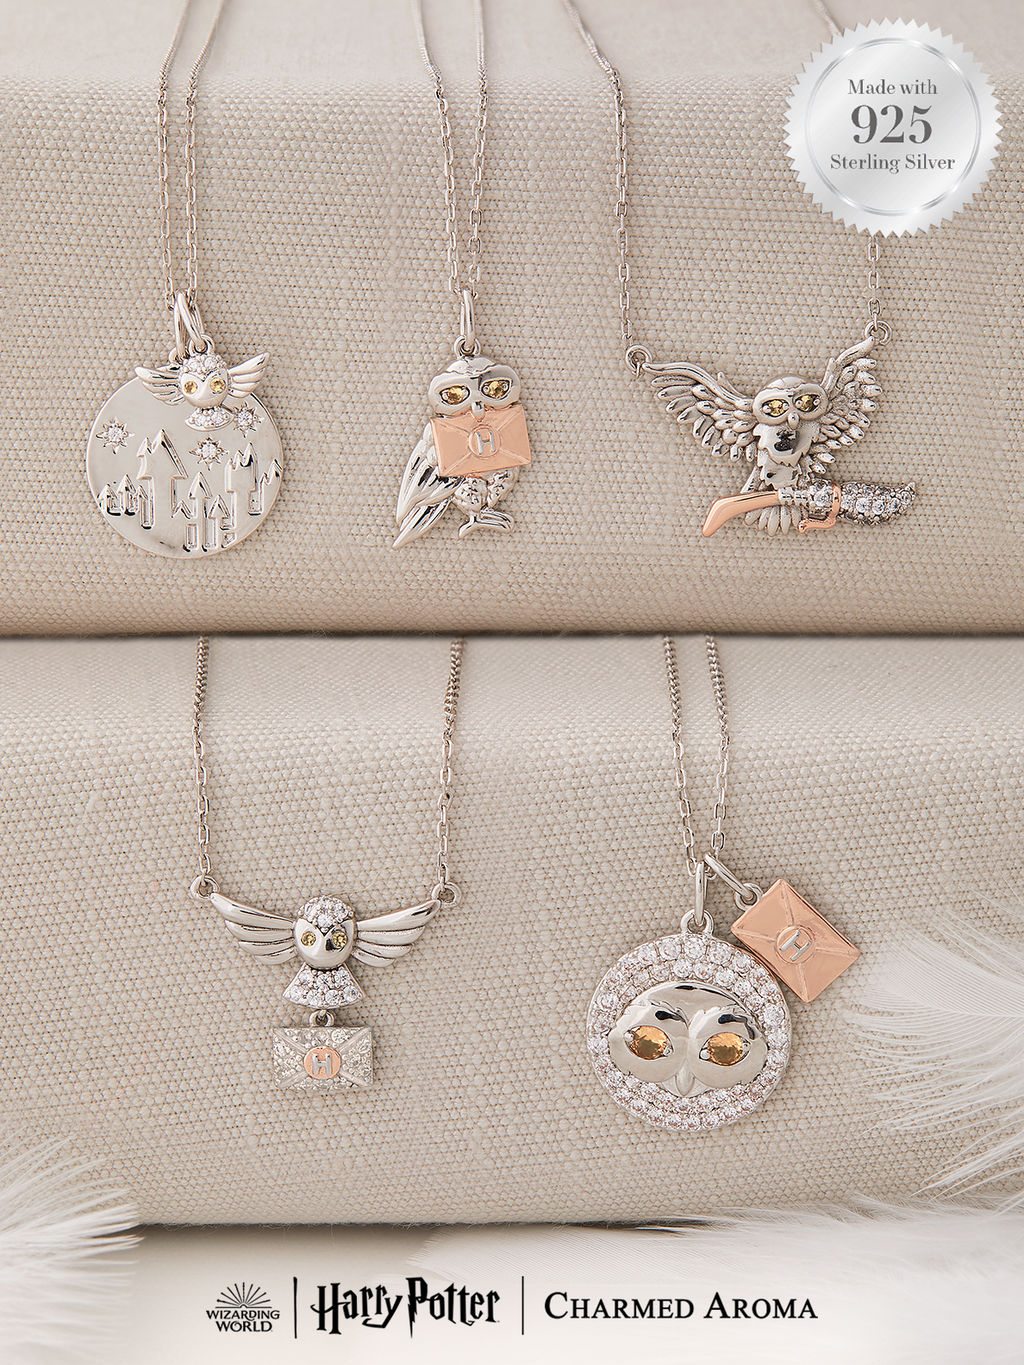 Harry Potter™ Hedwig Owl Candle - 925 Sterling Silver Hedwig Owl Necklace Collection